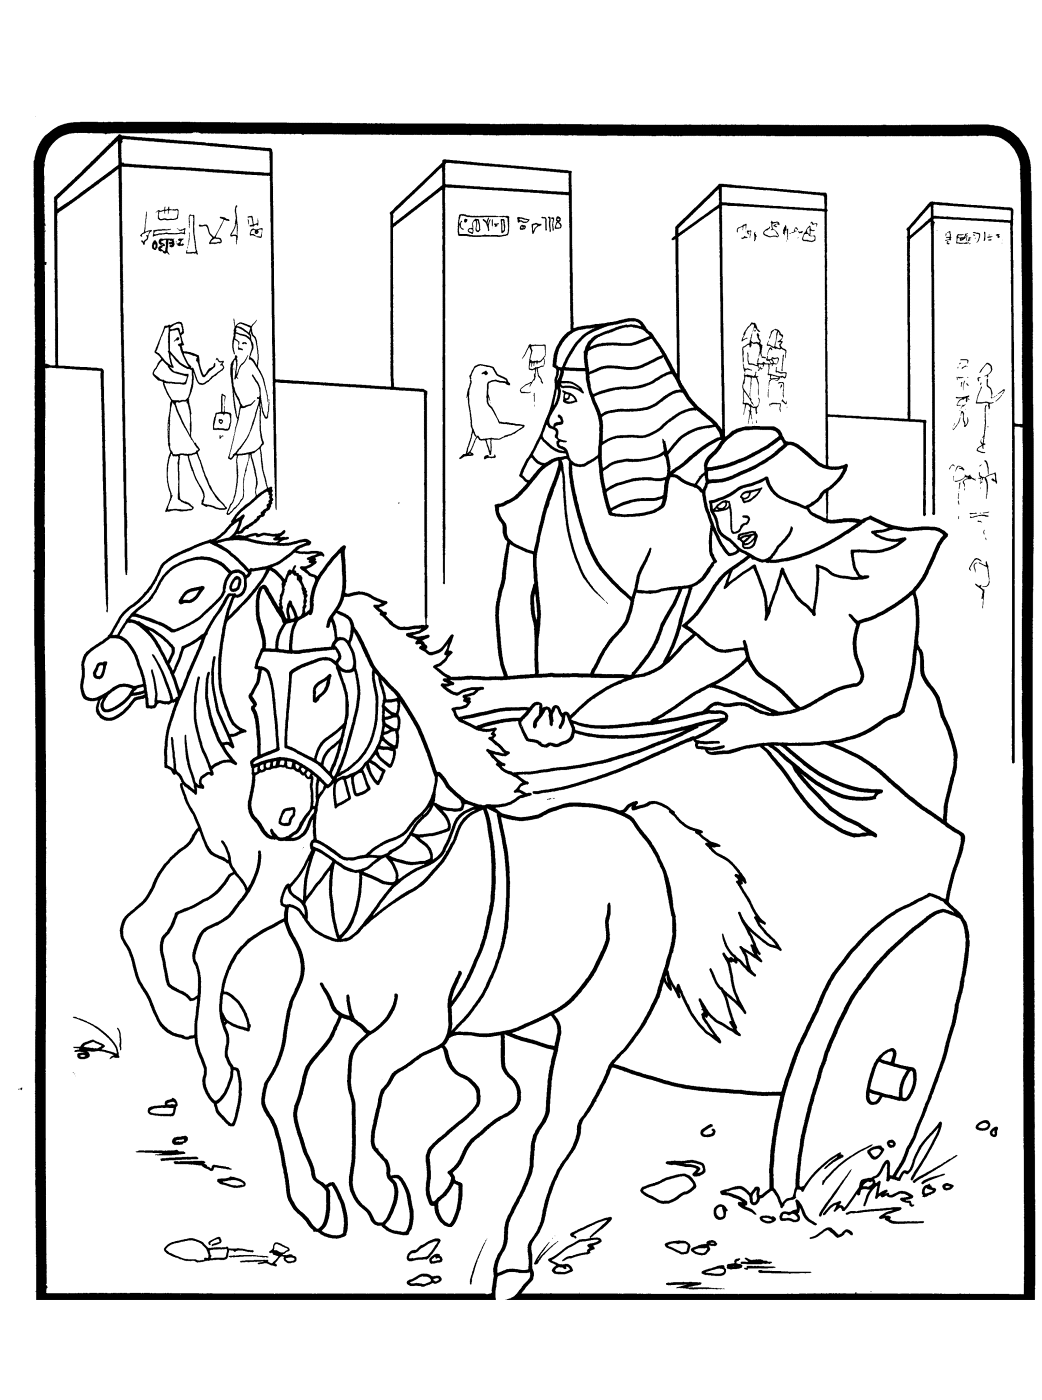 Incredible Egypt coloring page to print and color for free